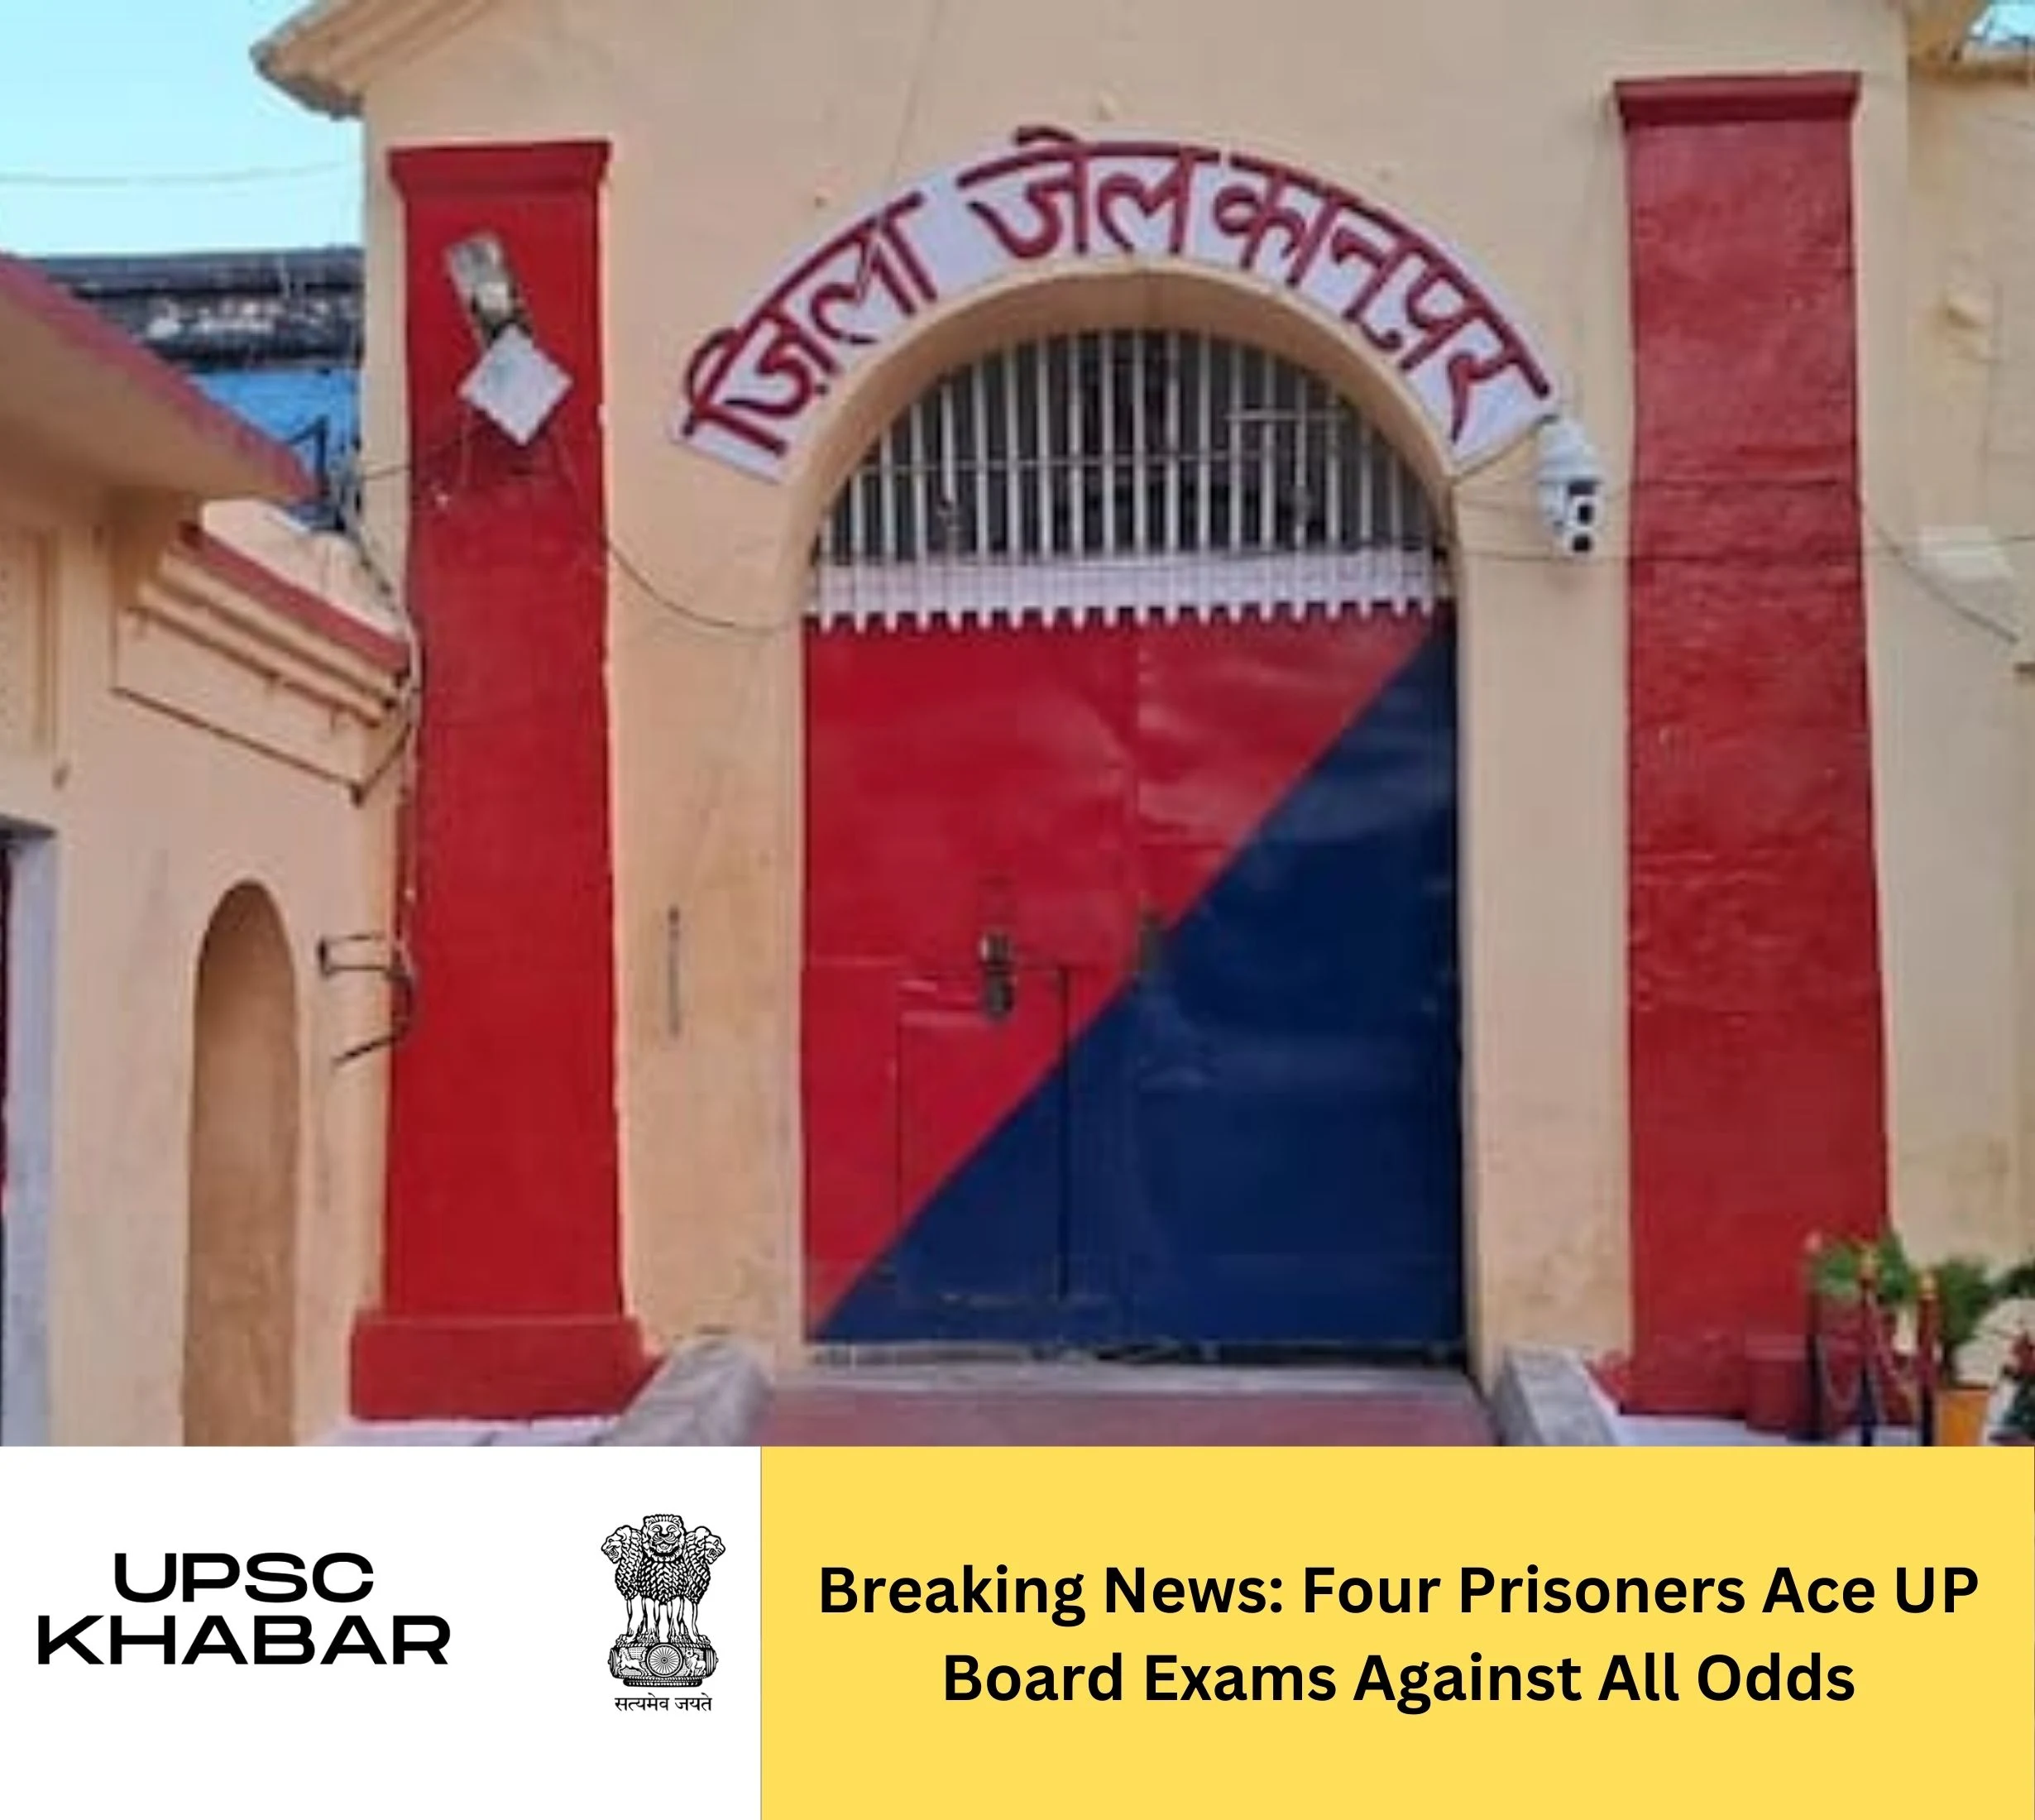 Breaking News: Four Prisoners Ace UP Board Exams Against All Odds